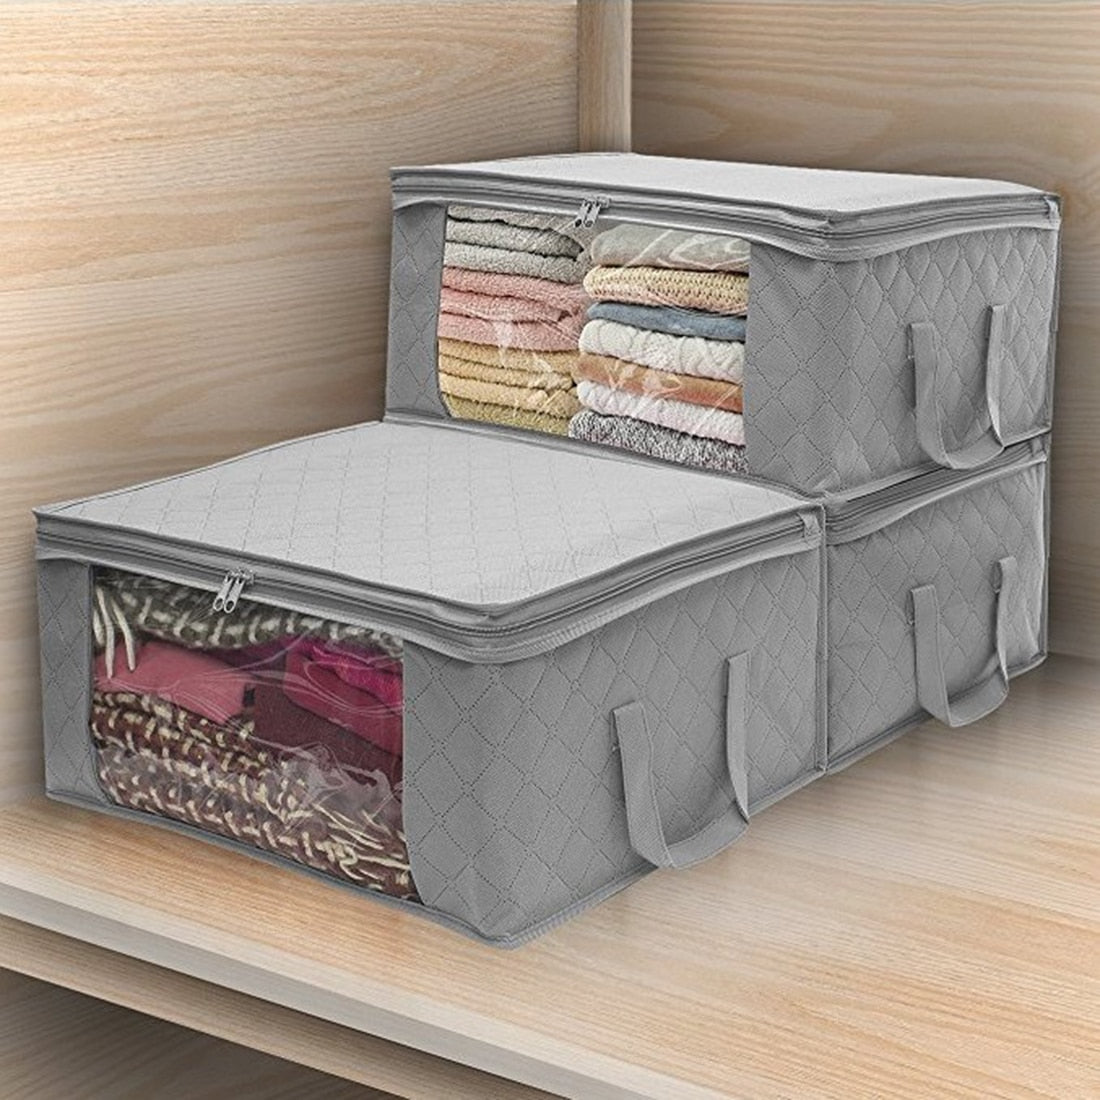 Foldable Clothes Storage Cube/s